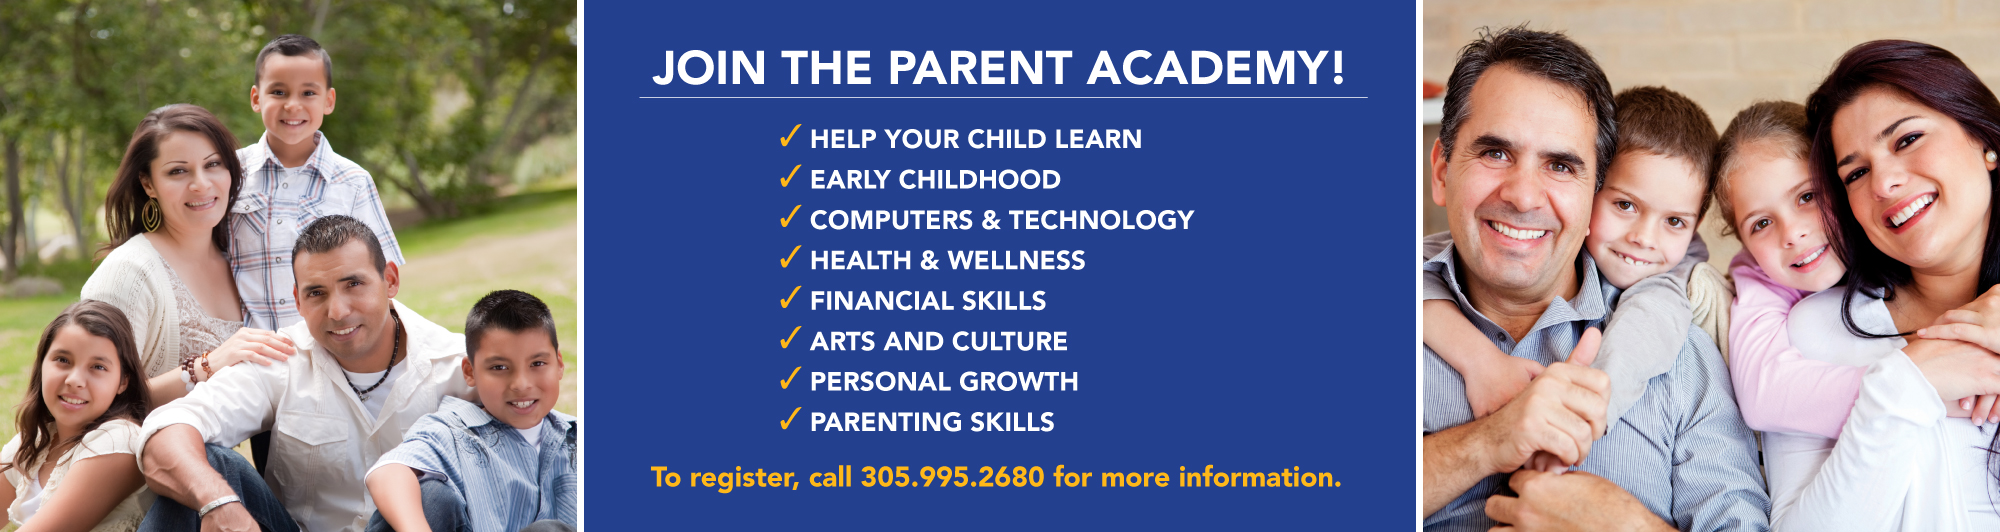 Join-the-Parent-Academy